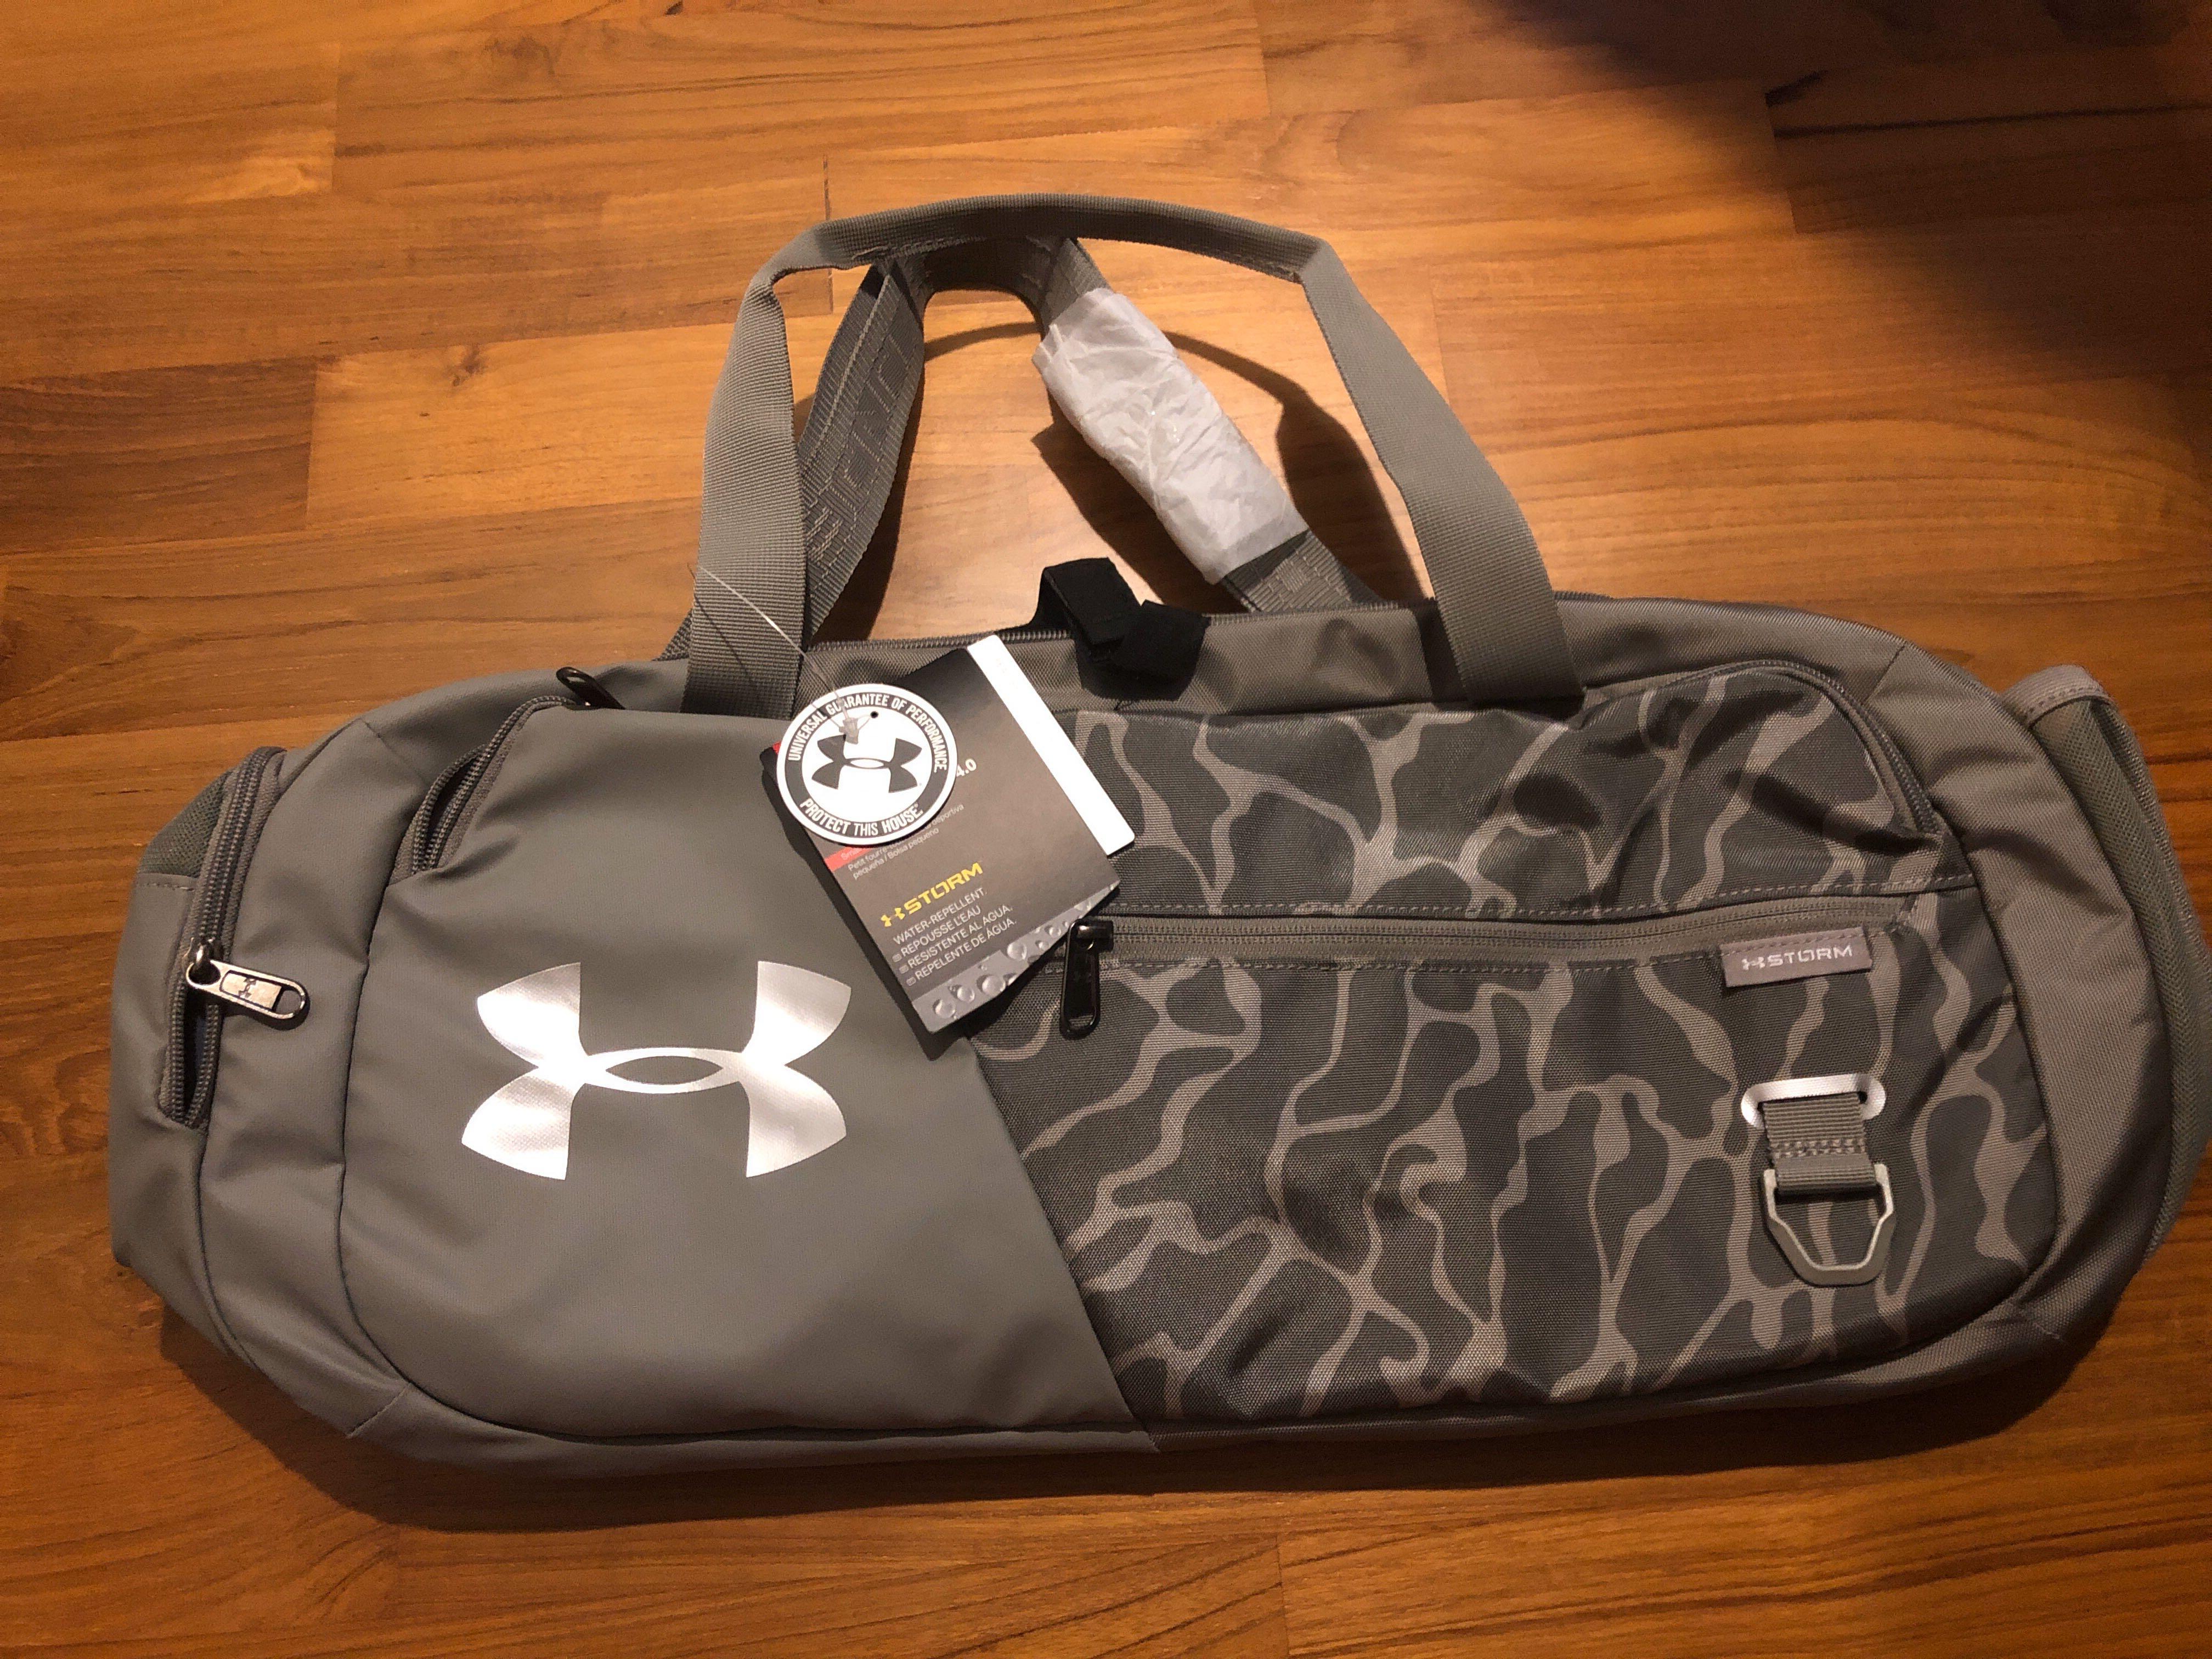 under armour storm duffle bag small